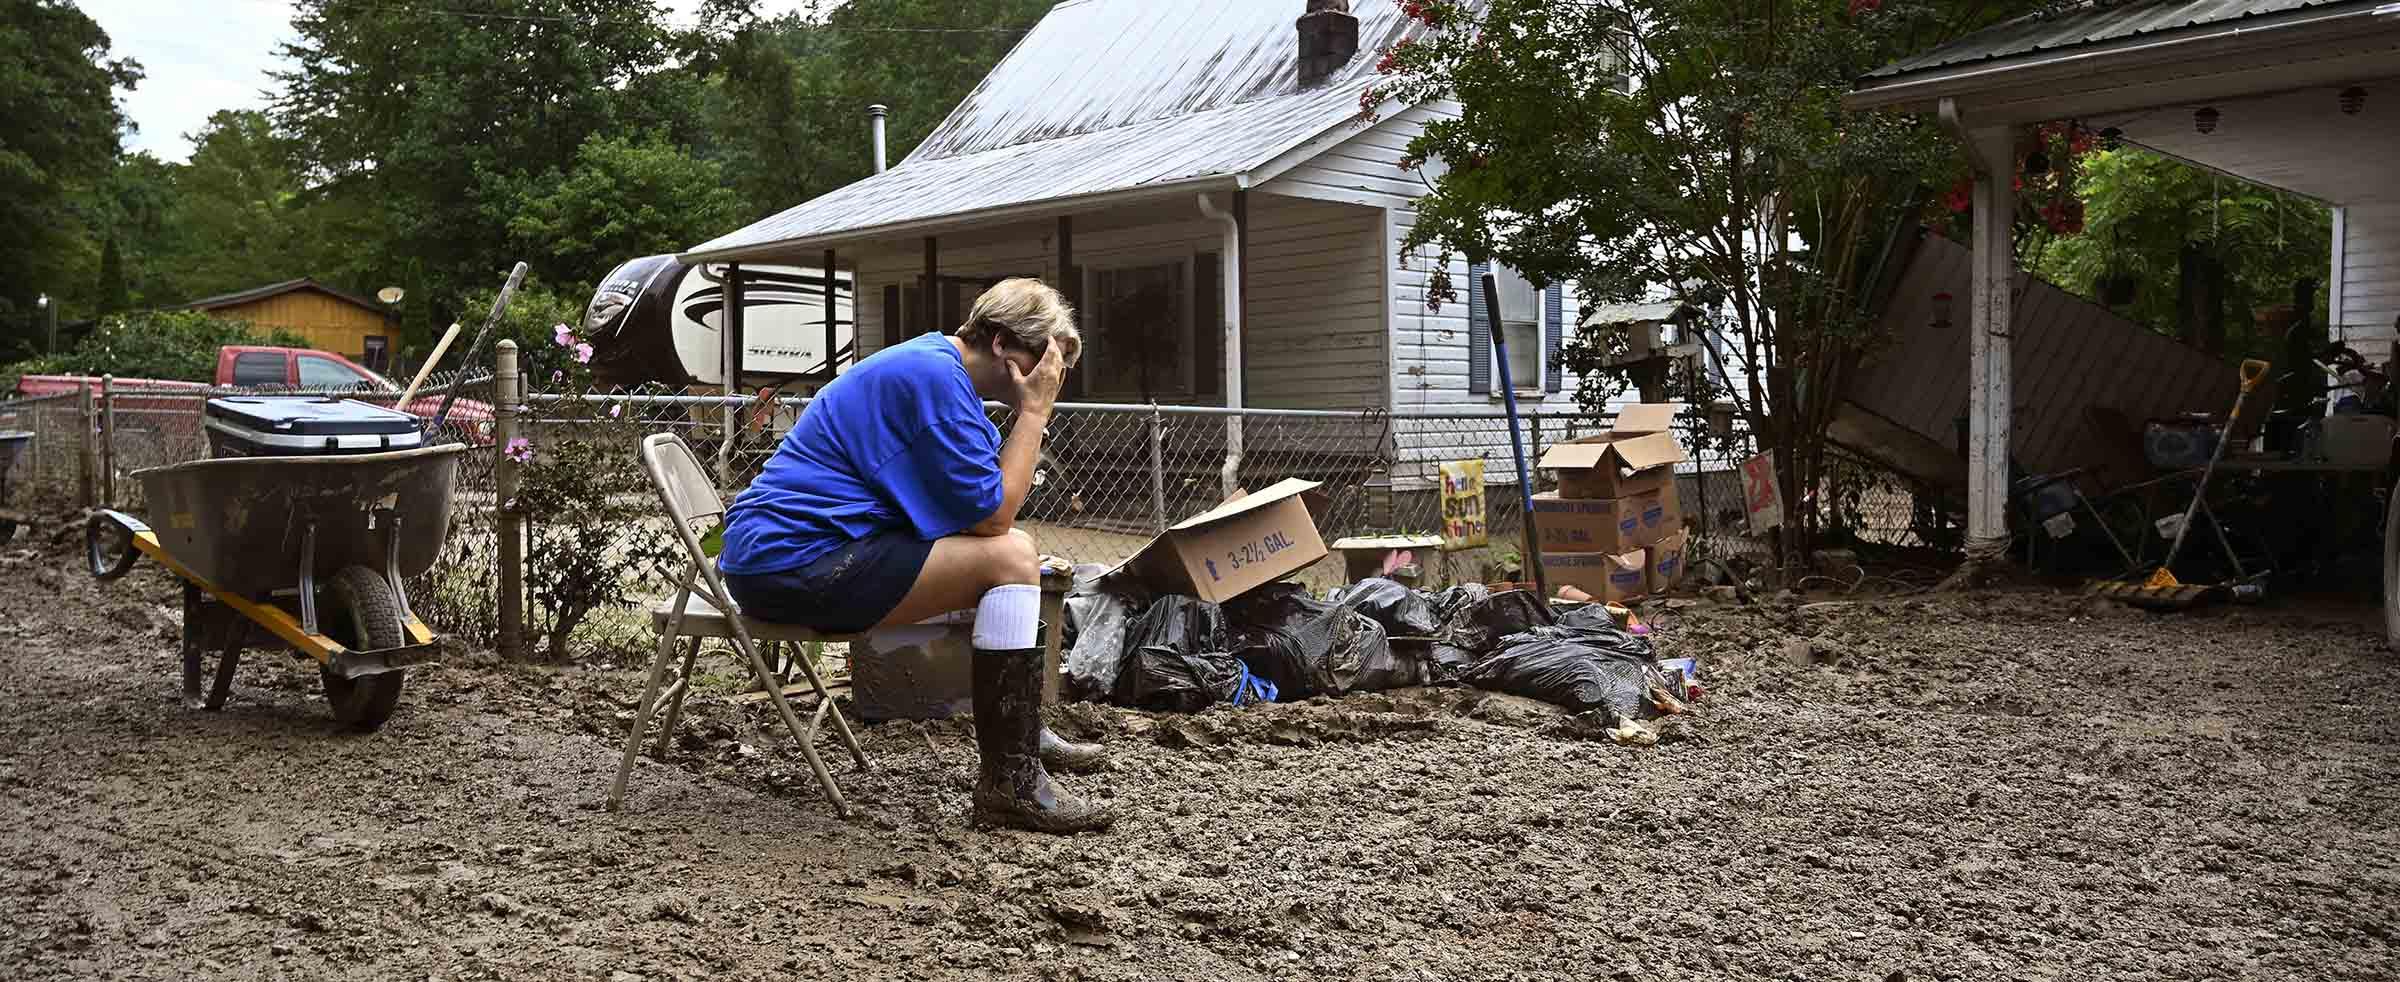 Teresa Reynolds sits exhausted as members of her community clean the debris from their flooded homes at Ogden Hollar in Hindman, Ky., Saturday, July 30. (AP Photo by Timothy D. Easley)